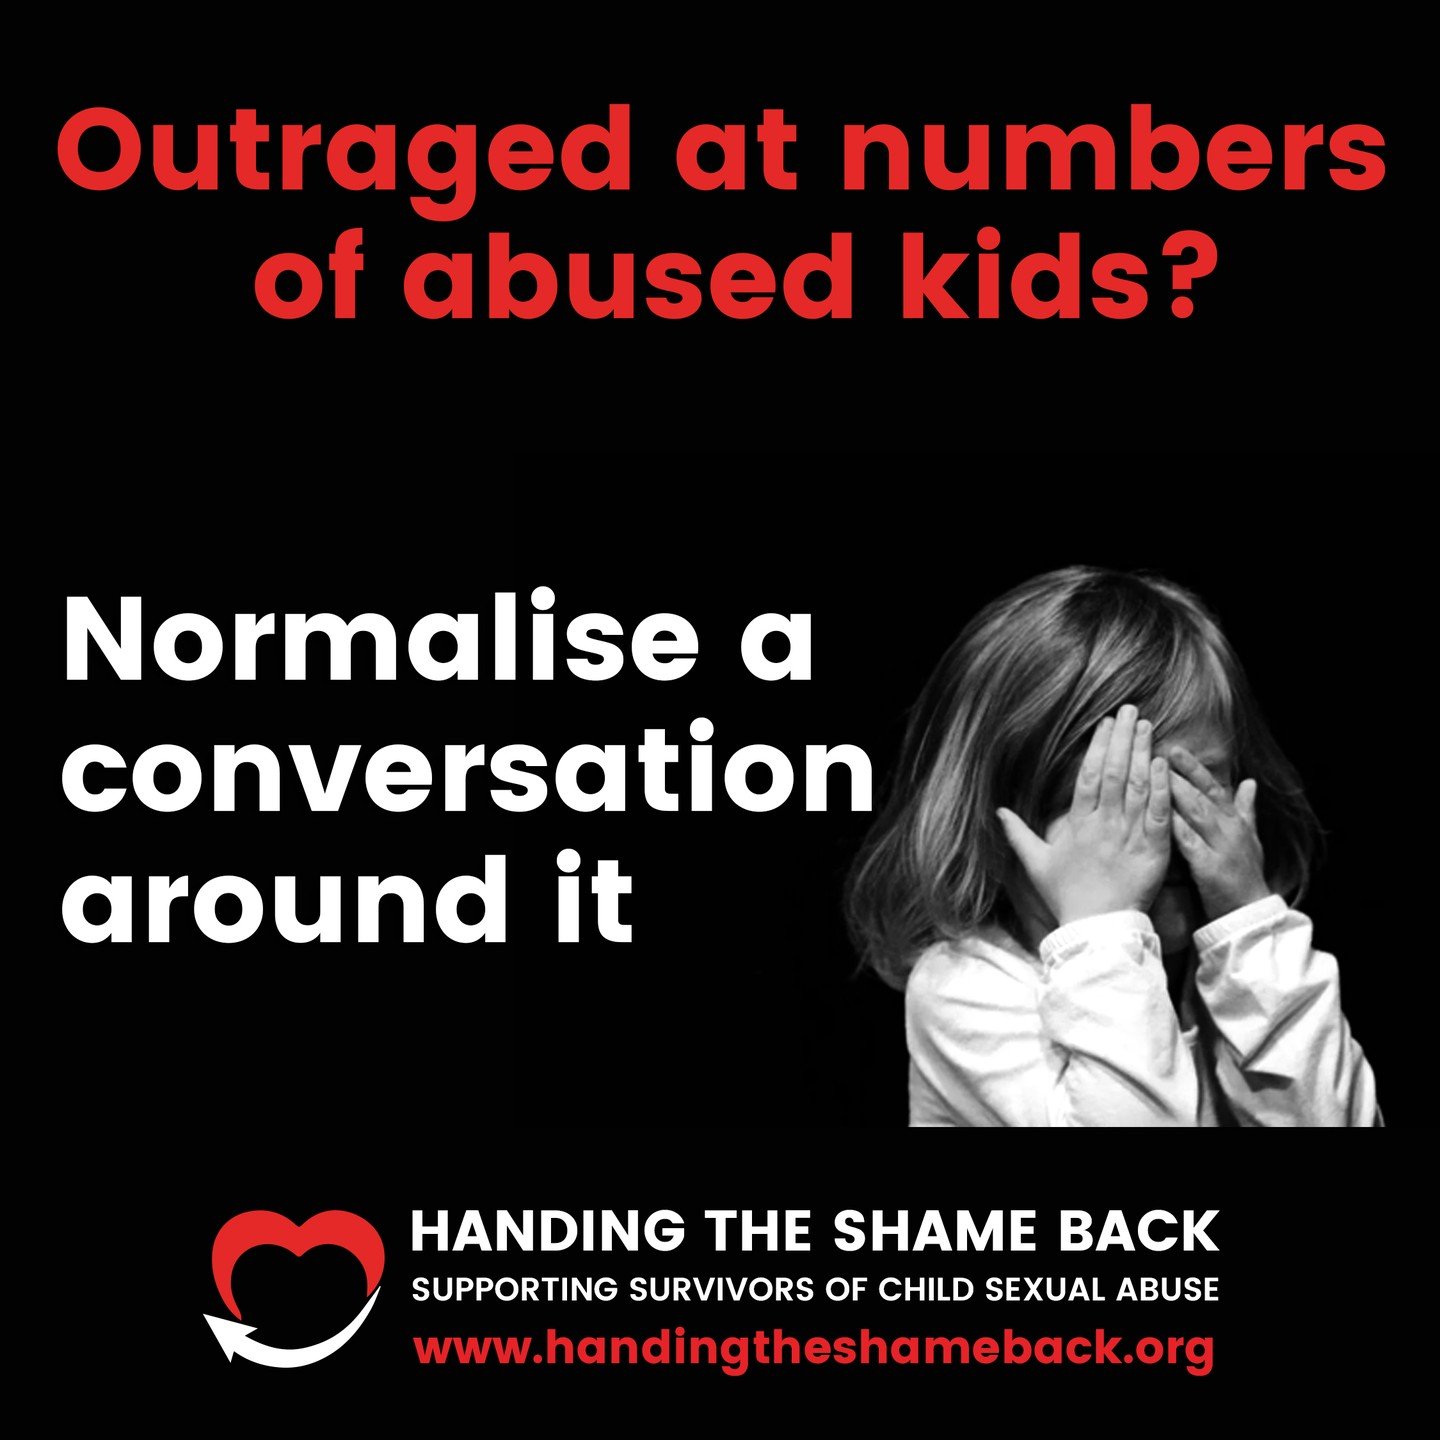 Let's save some Kids
The topic of child sexual abuse needs to be discussed, talked about, so that children can be kept safe. Please help me save some kids by having conversations about this.
For more information go to handingtheshameback.org
#handsig